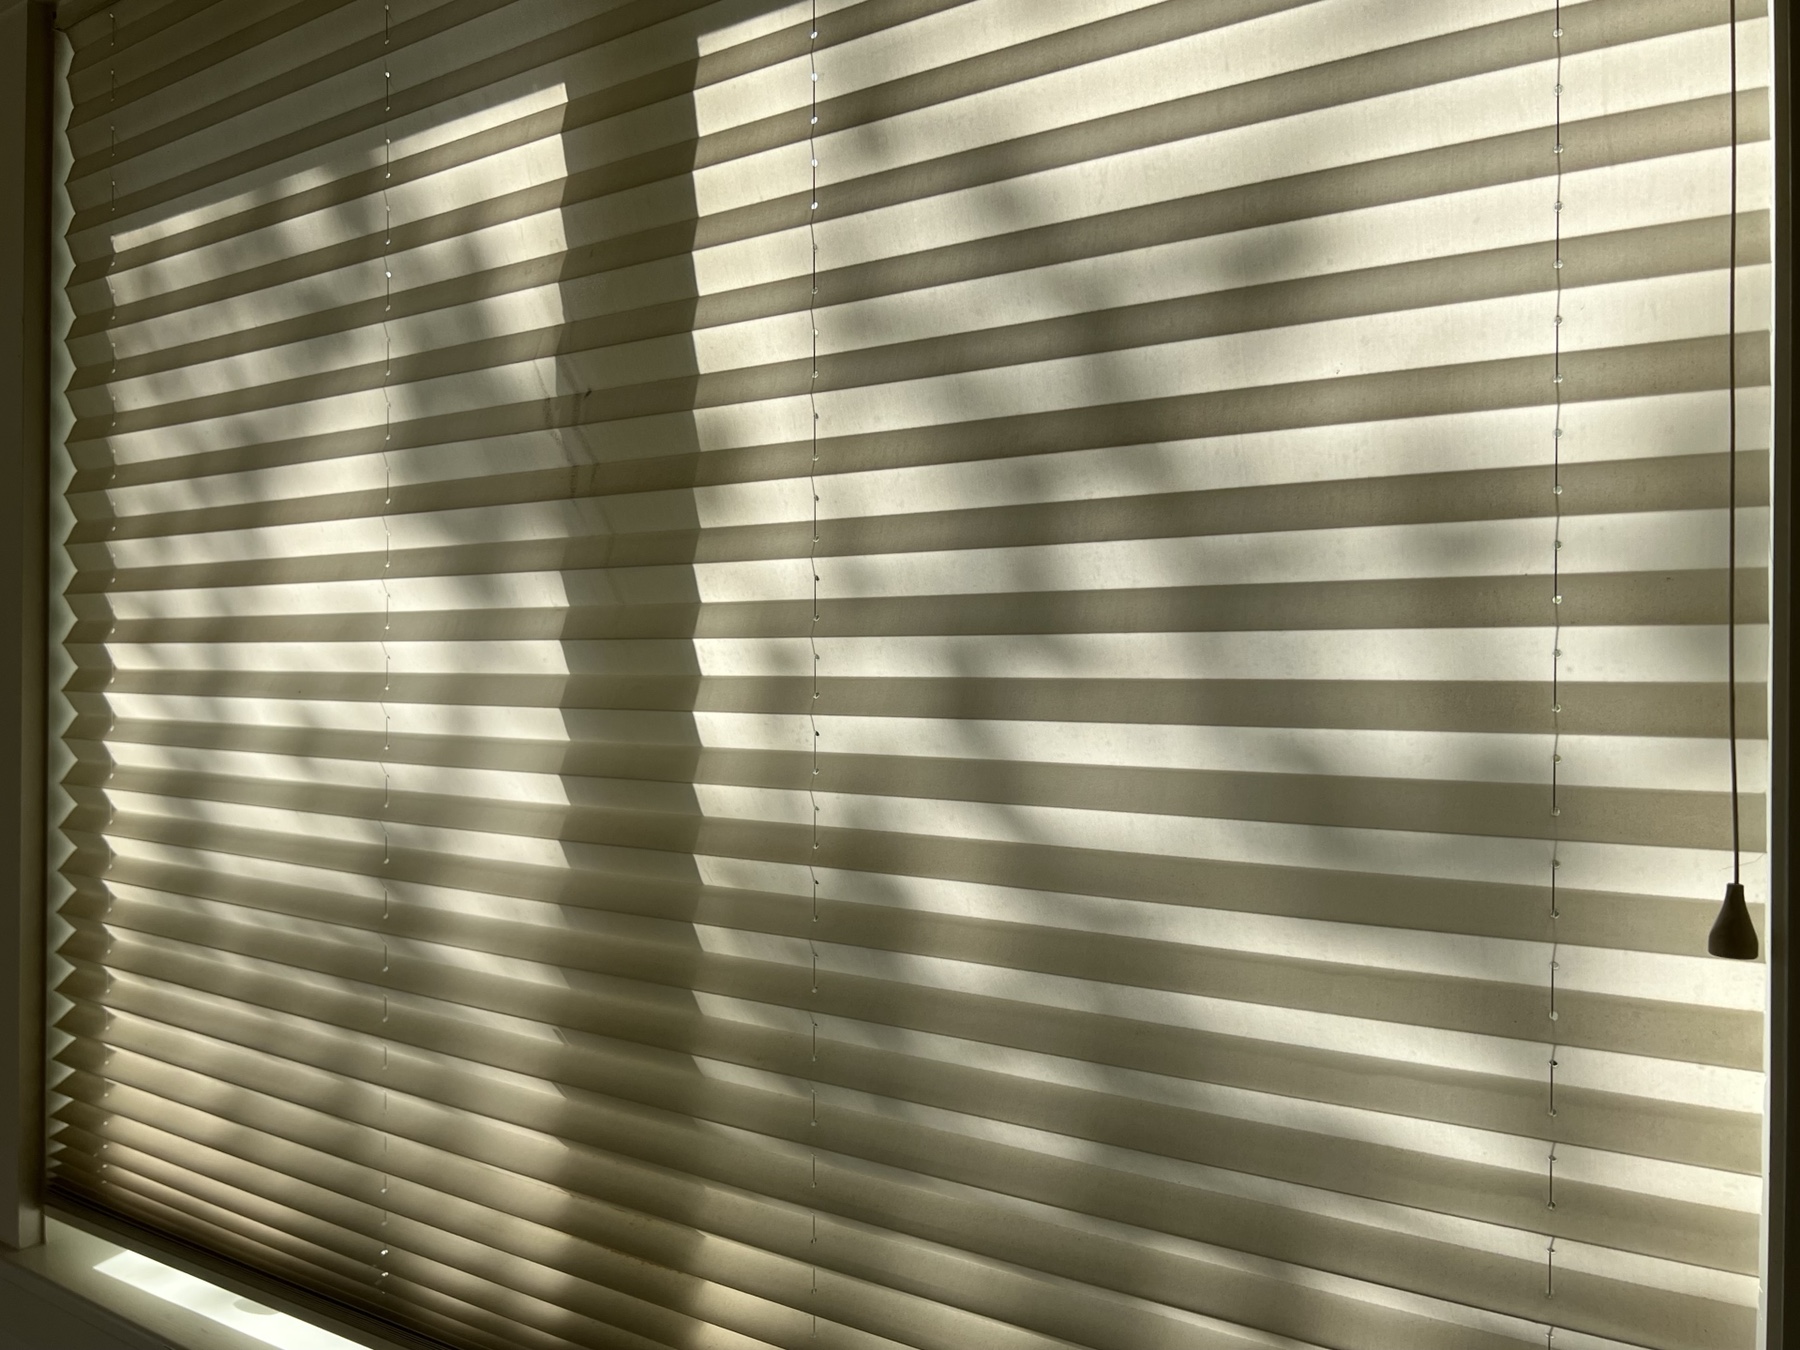 window shade in afternoon sunlight with pleats making a striped pattern out of light and shadow